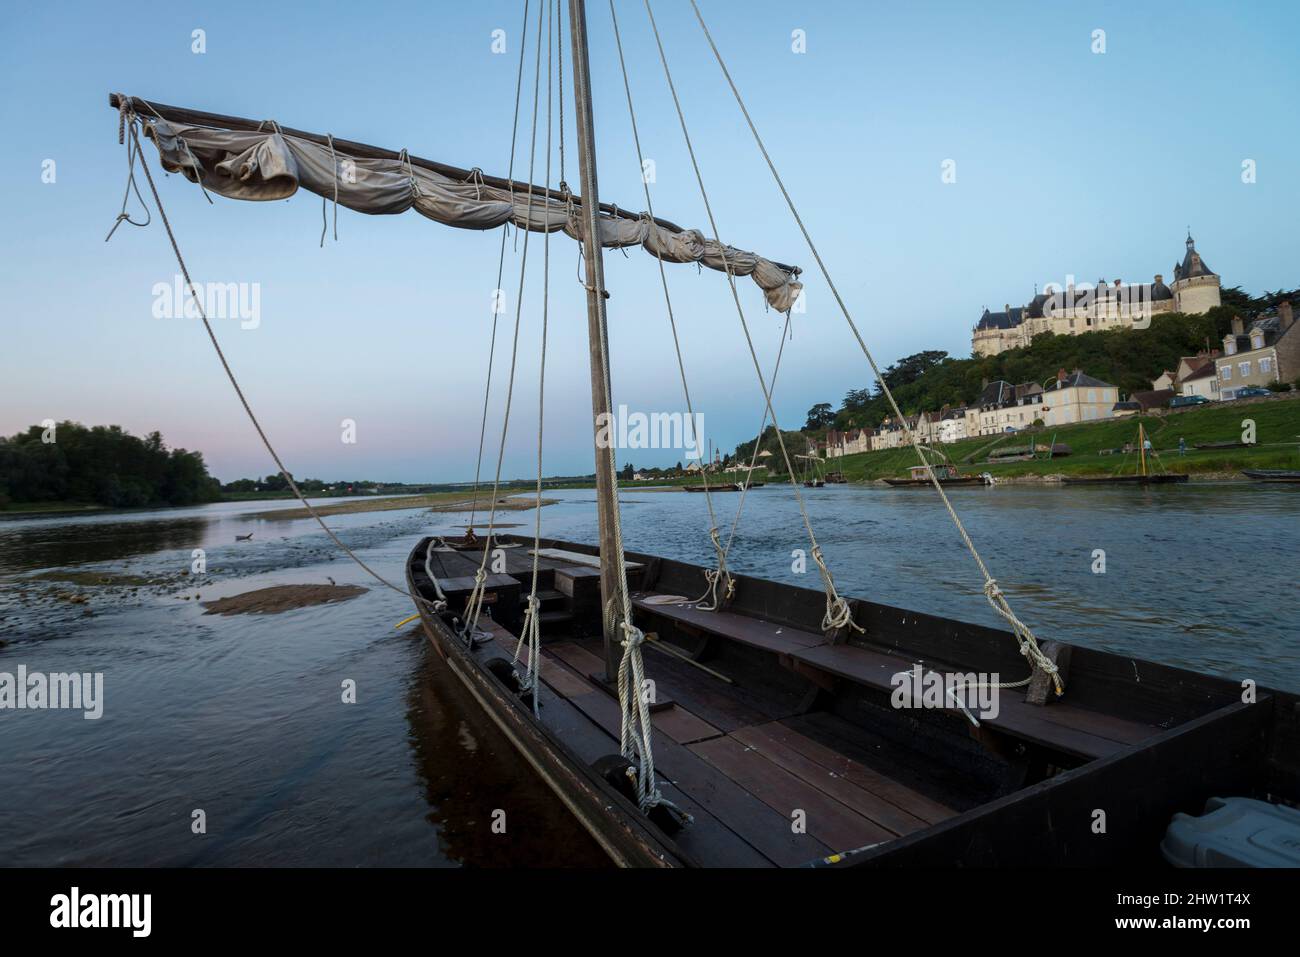 France, Loir-et-Cher (41), Traditional boat, all sailing in the evening in front of the castle of Chaumont-sur-Loire on the Loire (classified UNESCO World Heritage) Stock Photo